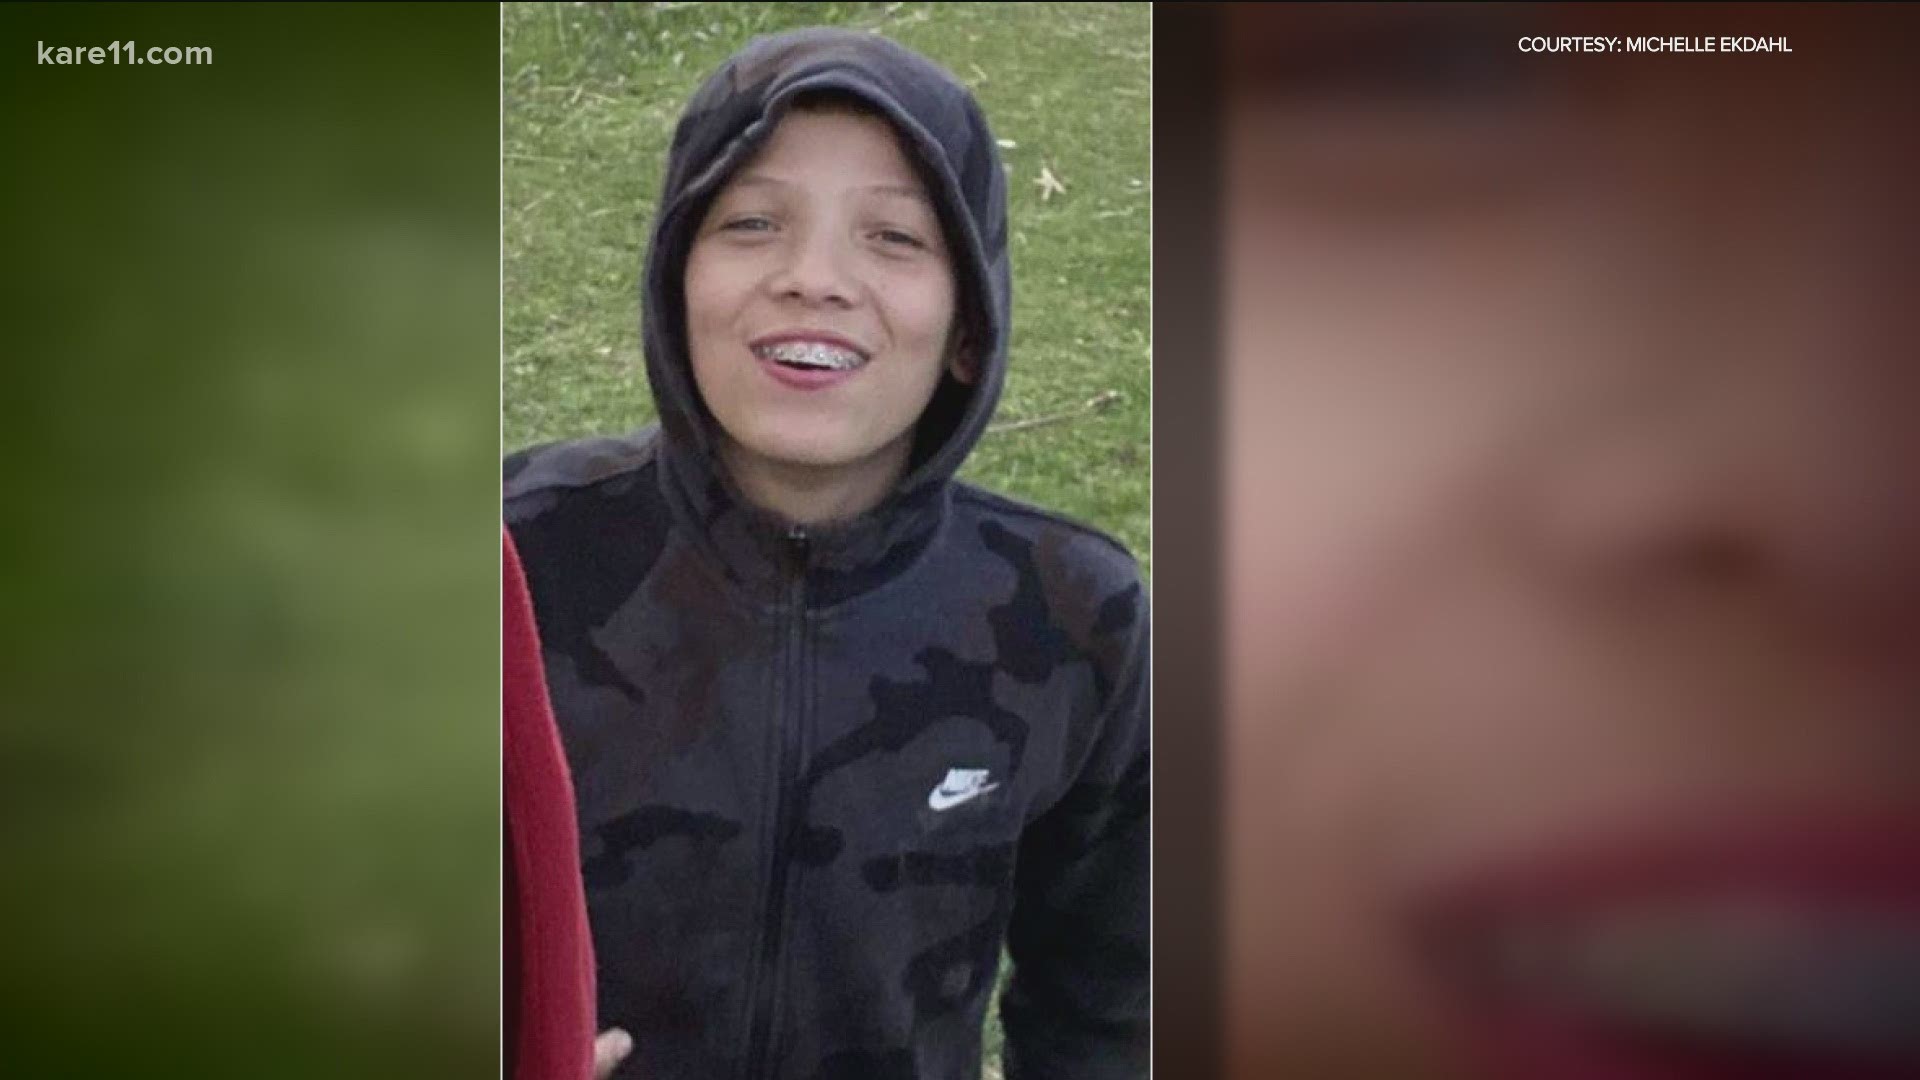 Demaris Nathan Hobbs-Ekdahl, 14, was shot and killed Saturday night while attending the party with his older brother.